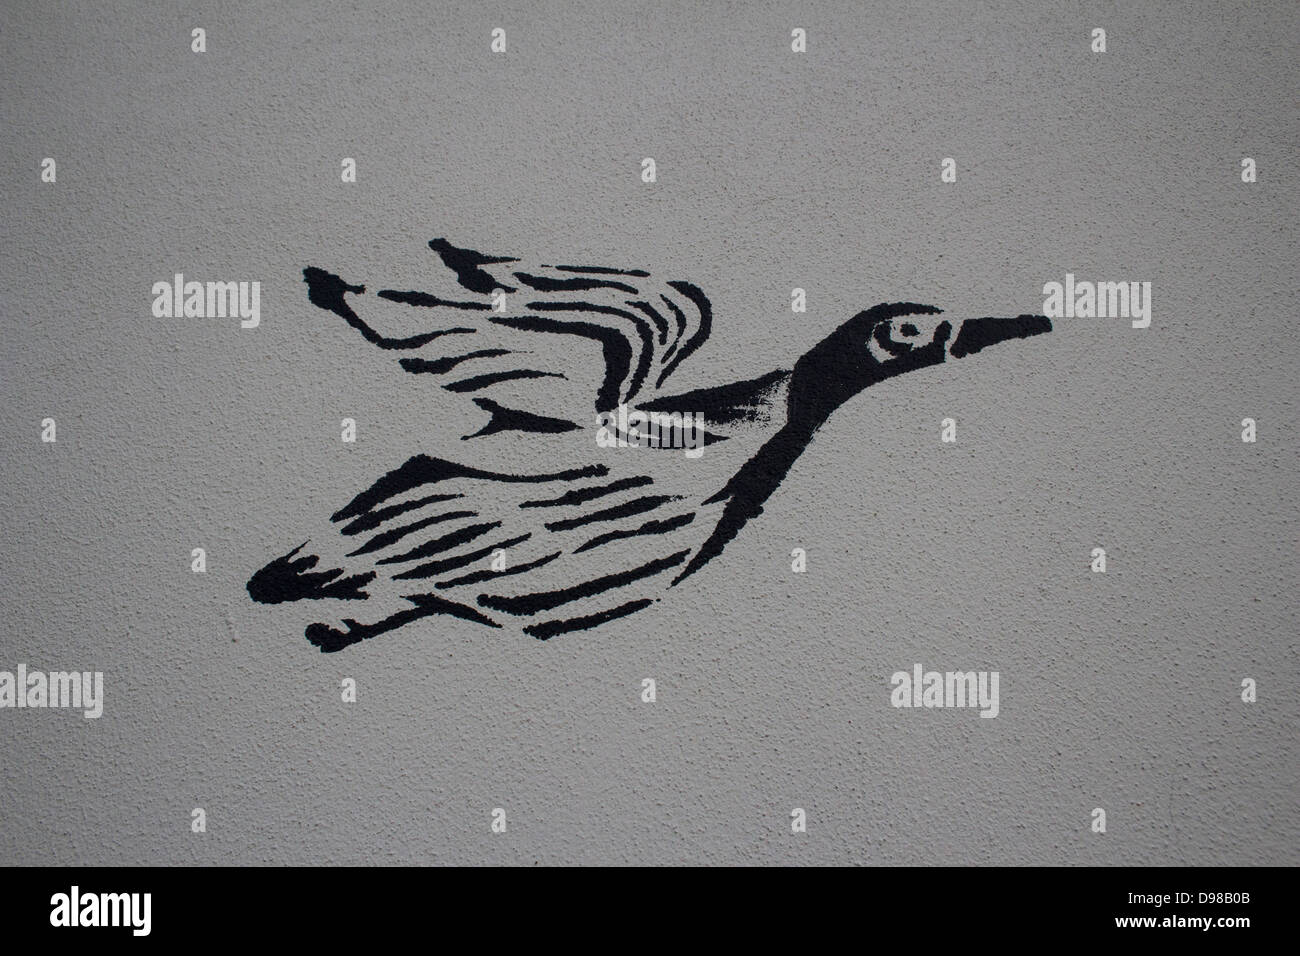 A spray painted graffiti duck, in black on a grey background in the style of Banksy. Stock Photo